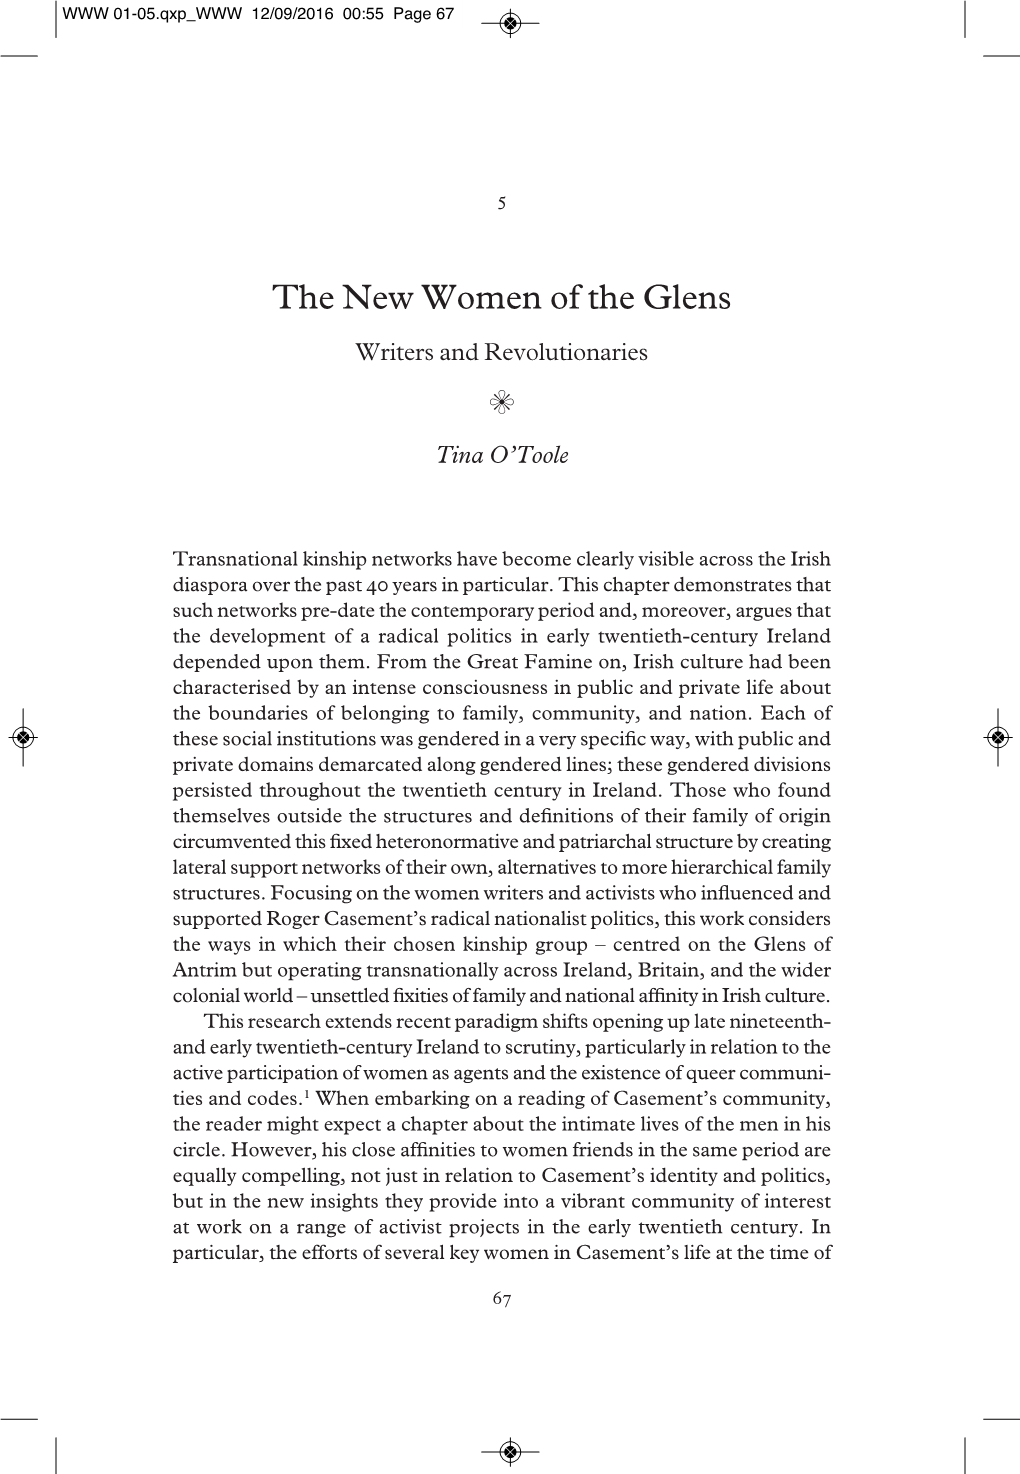 The New Women of the Glens